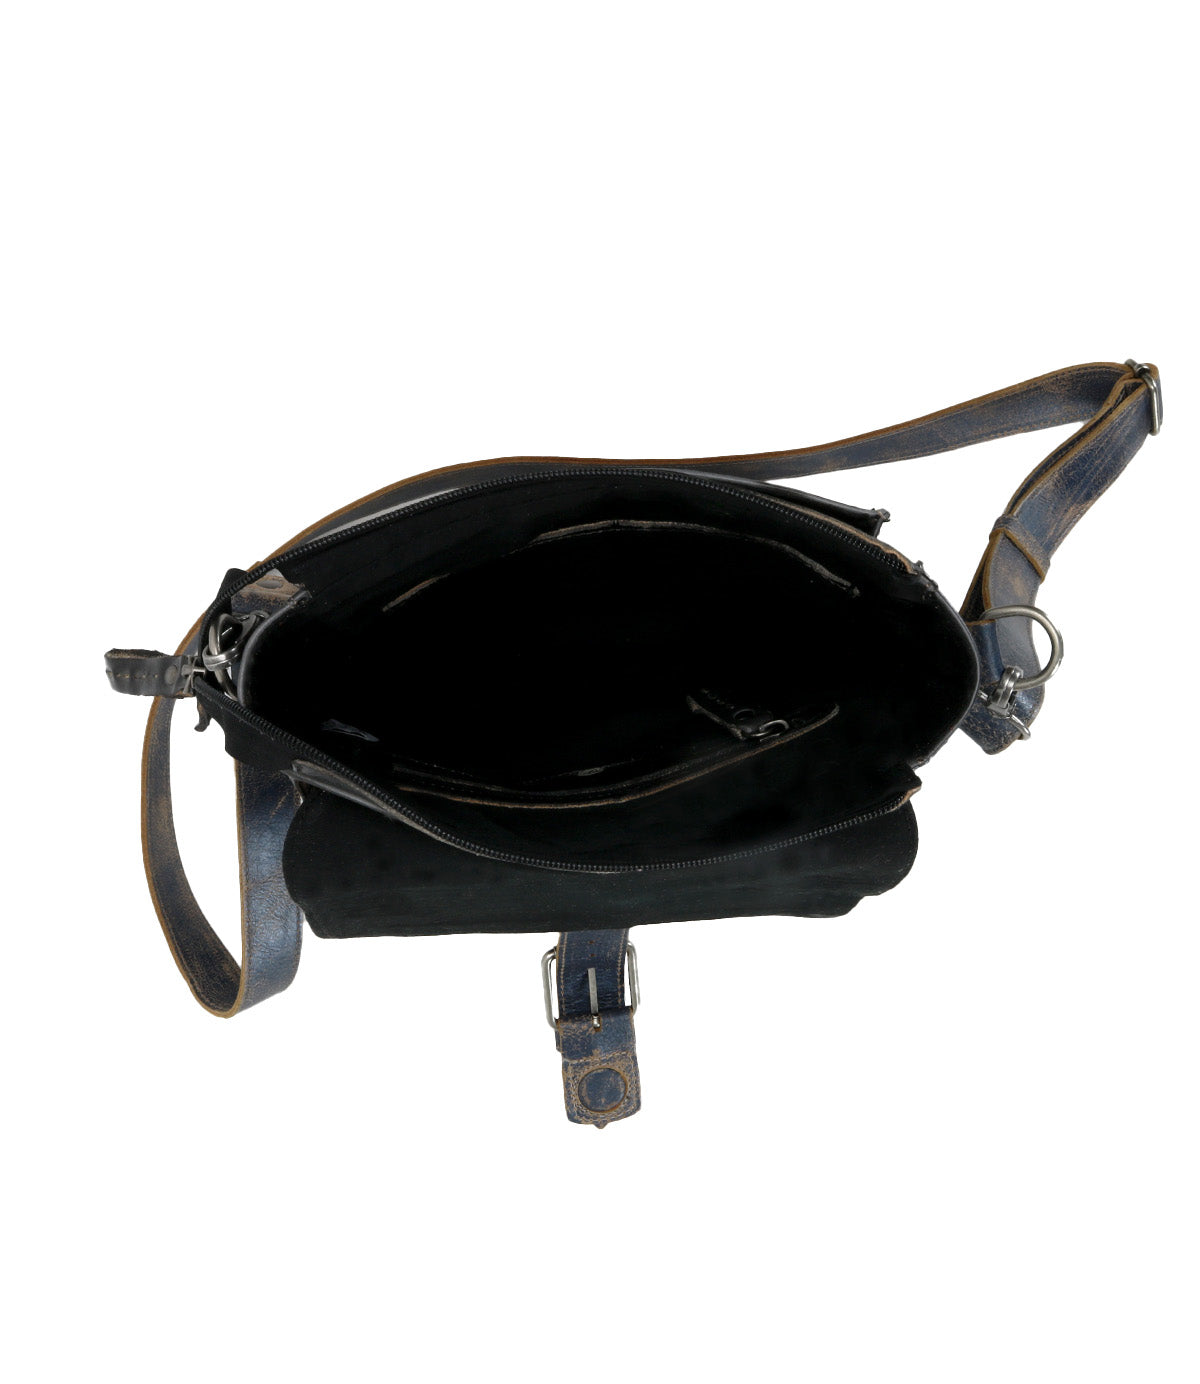 A Bed Stu Ainhoa black leather crossbody handbag with an adjustable strap for individuals seeking versatility and style.